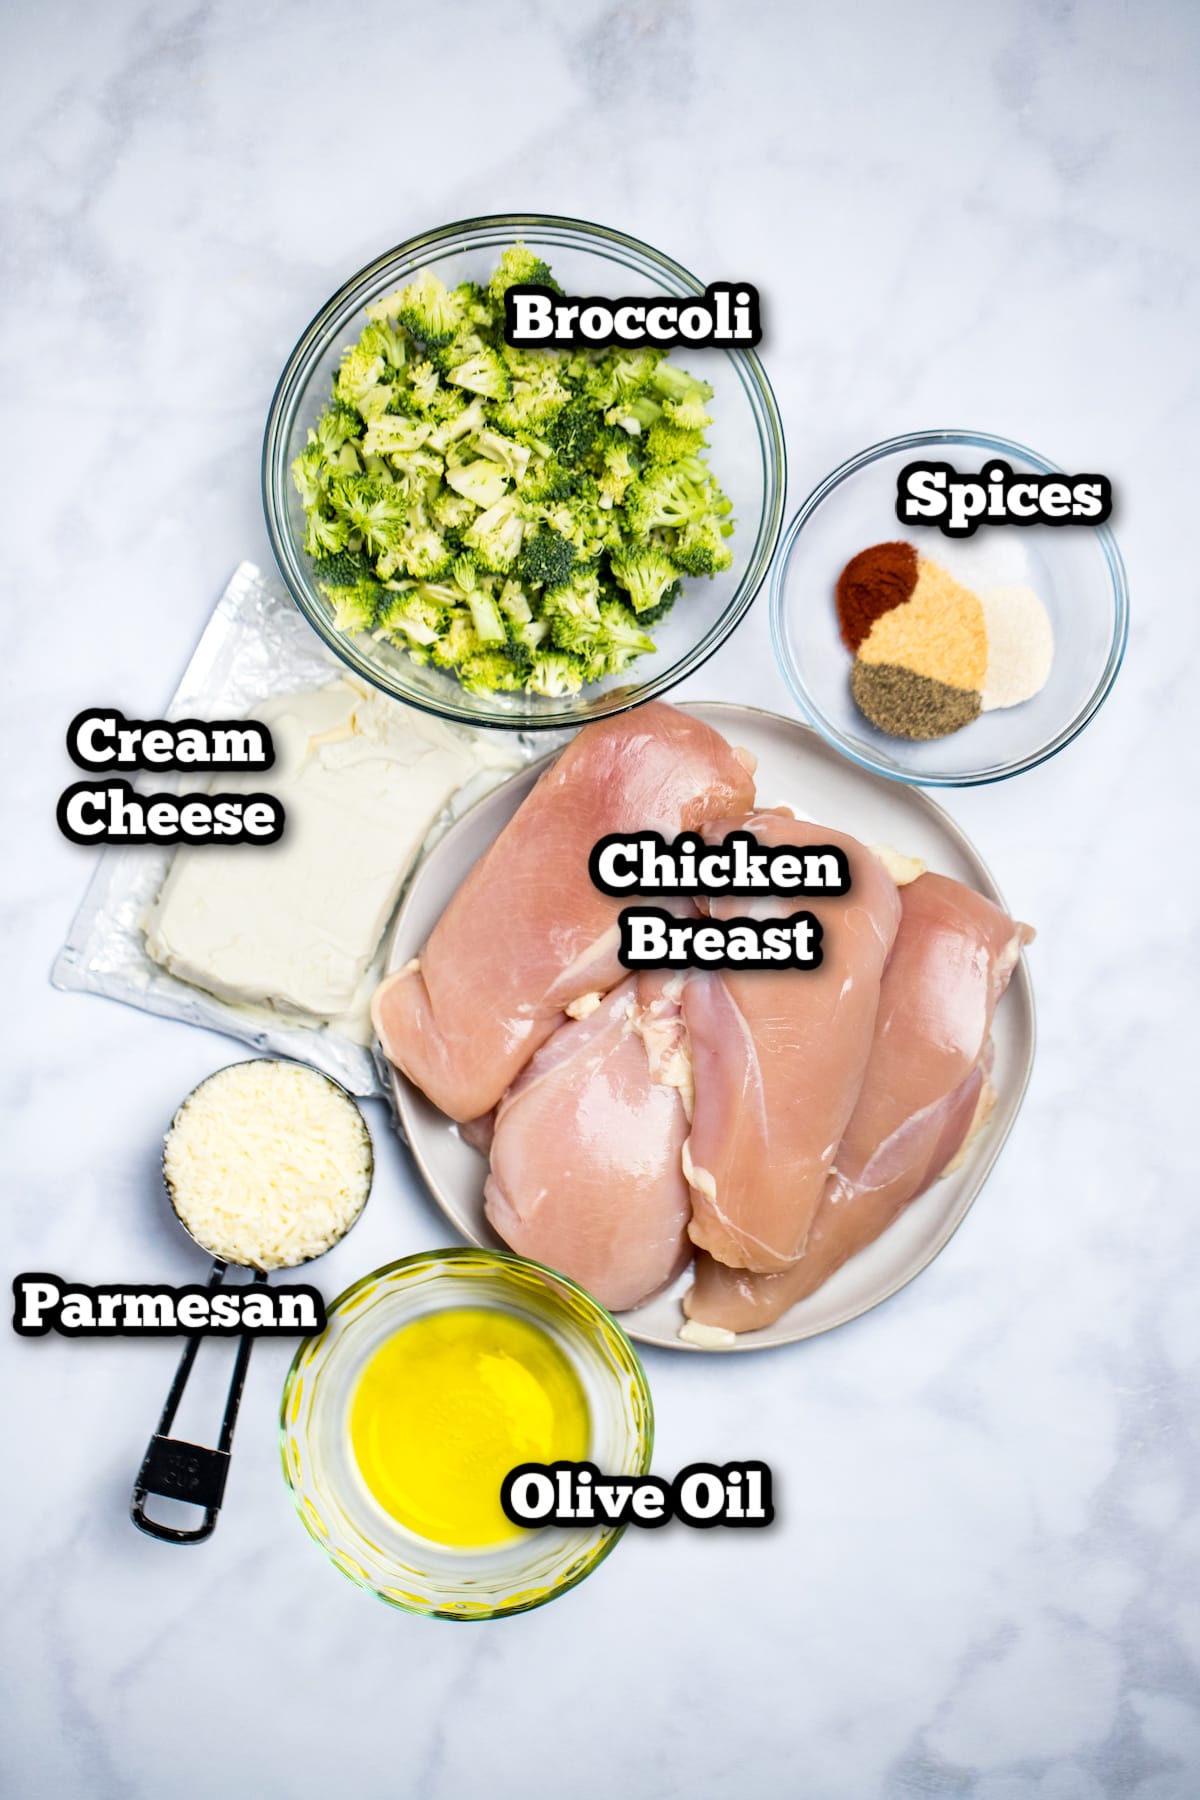 Individual ingredients needed to make broccoli and cheese stuffed chicken on a table.